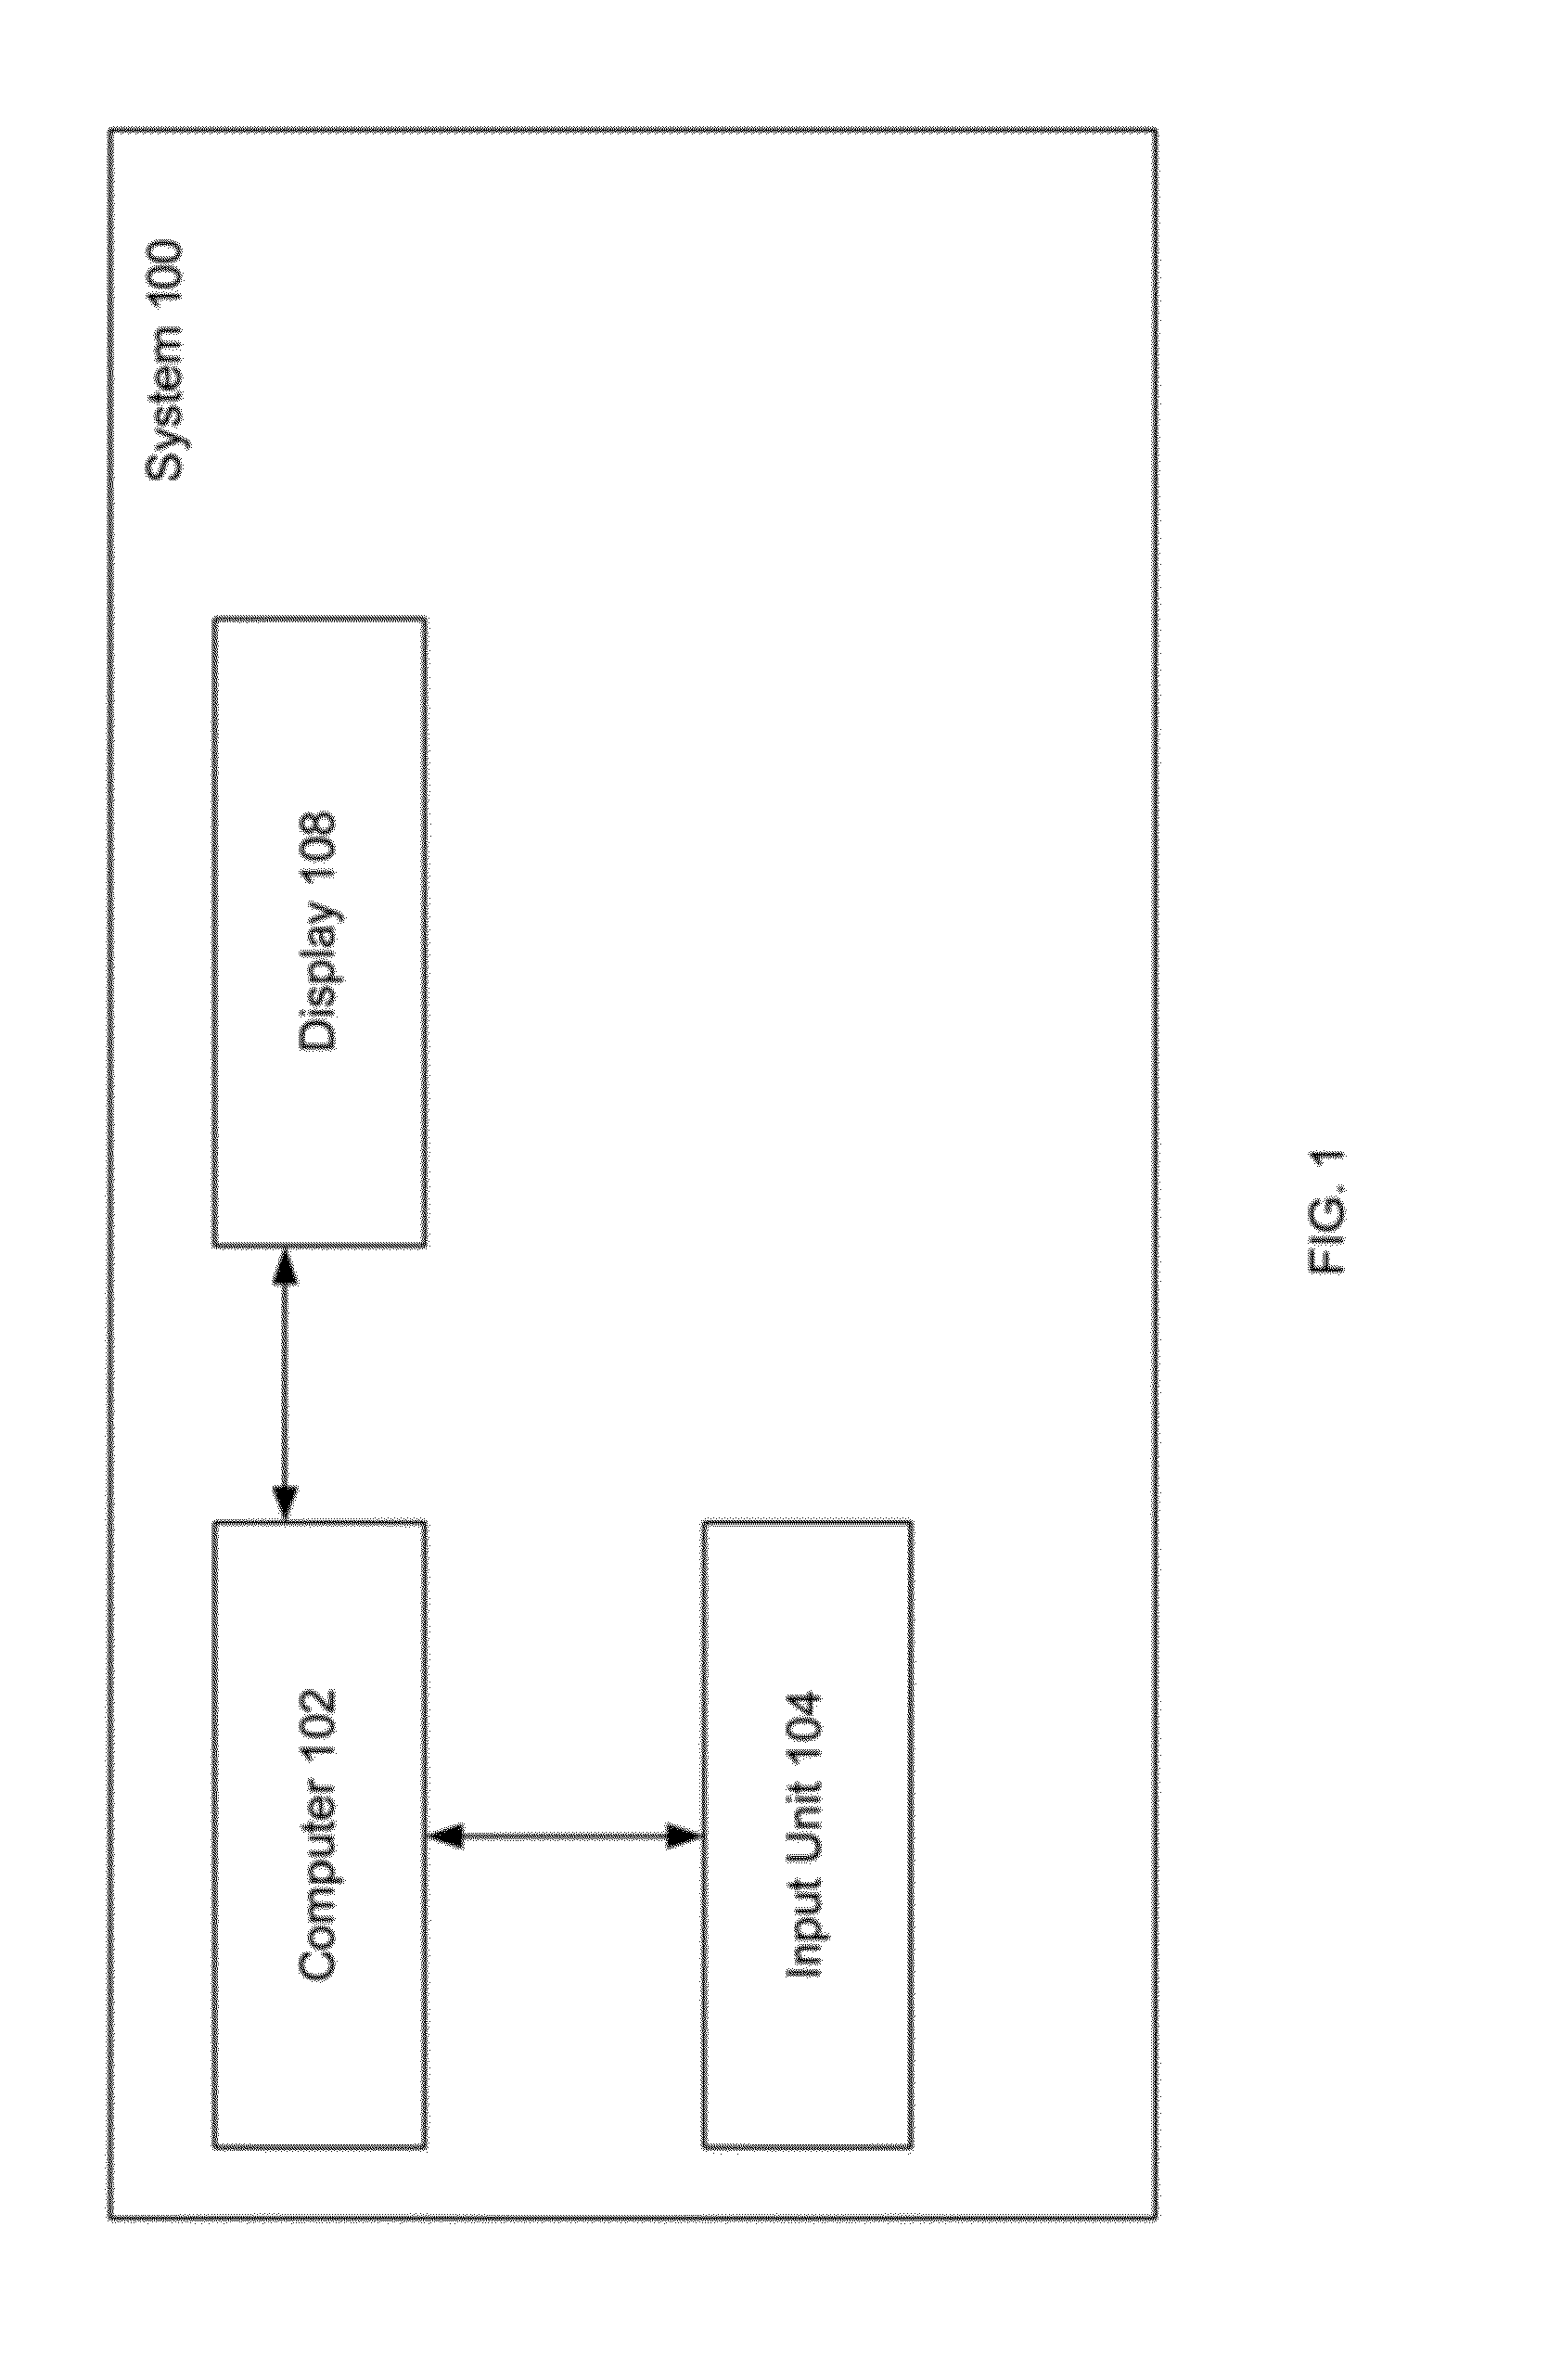 System and method for providing substantially stable haptics